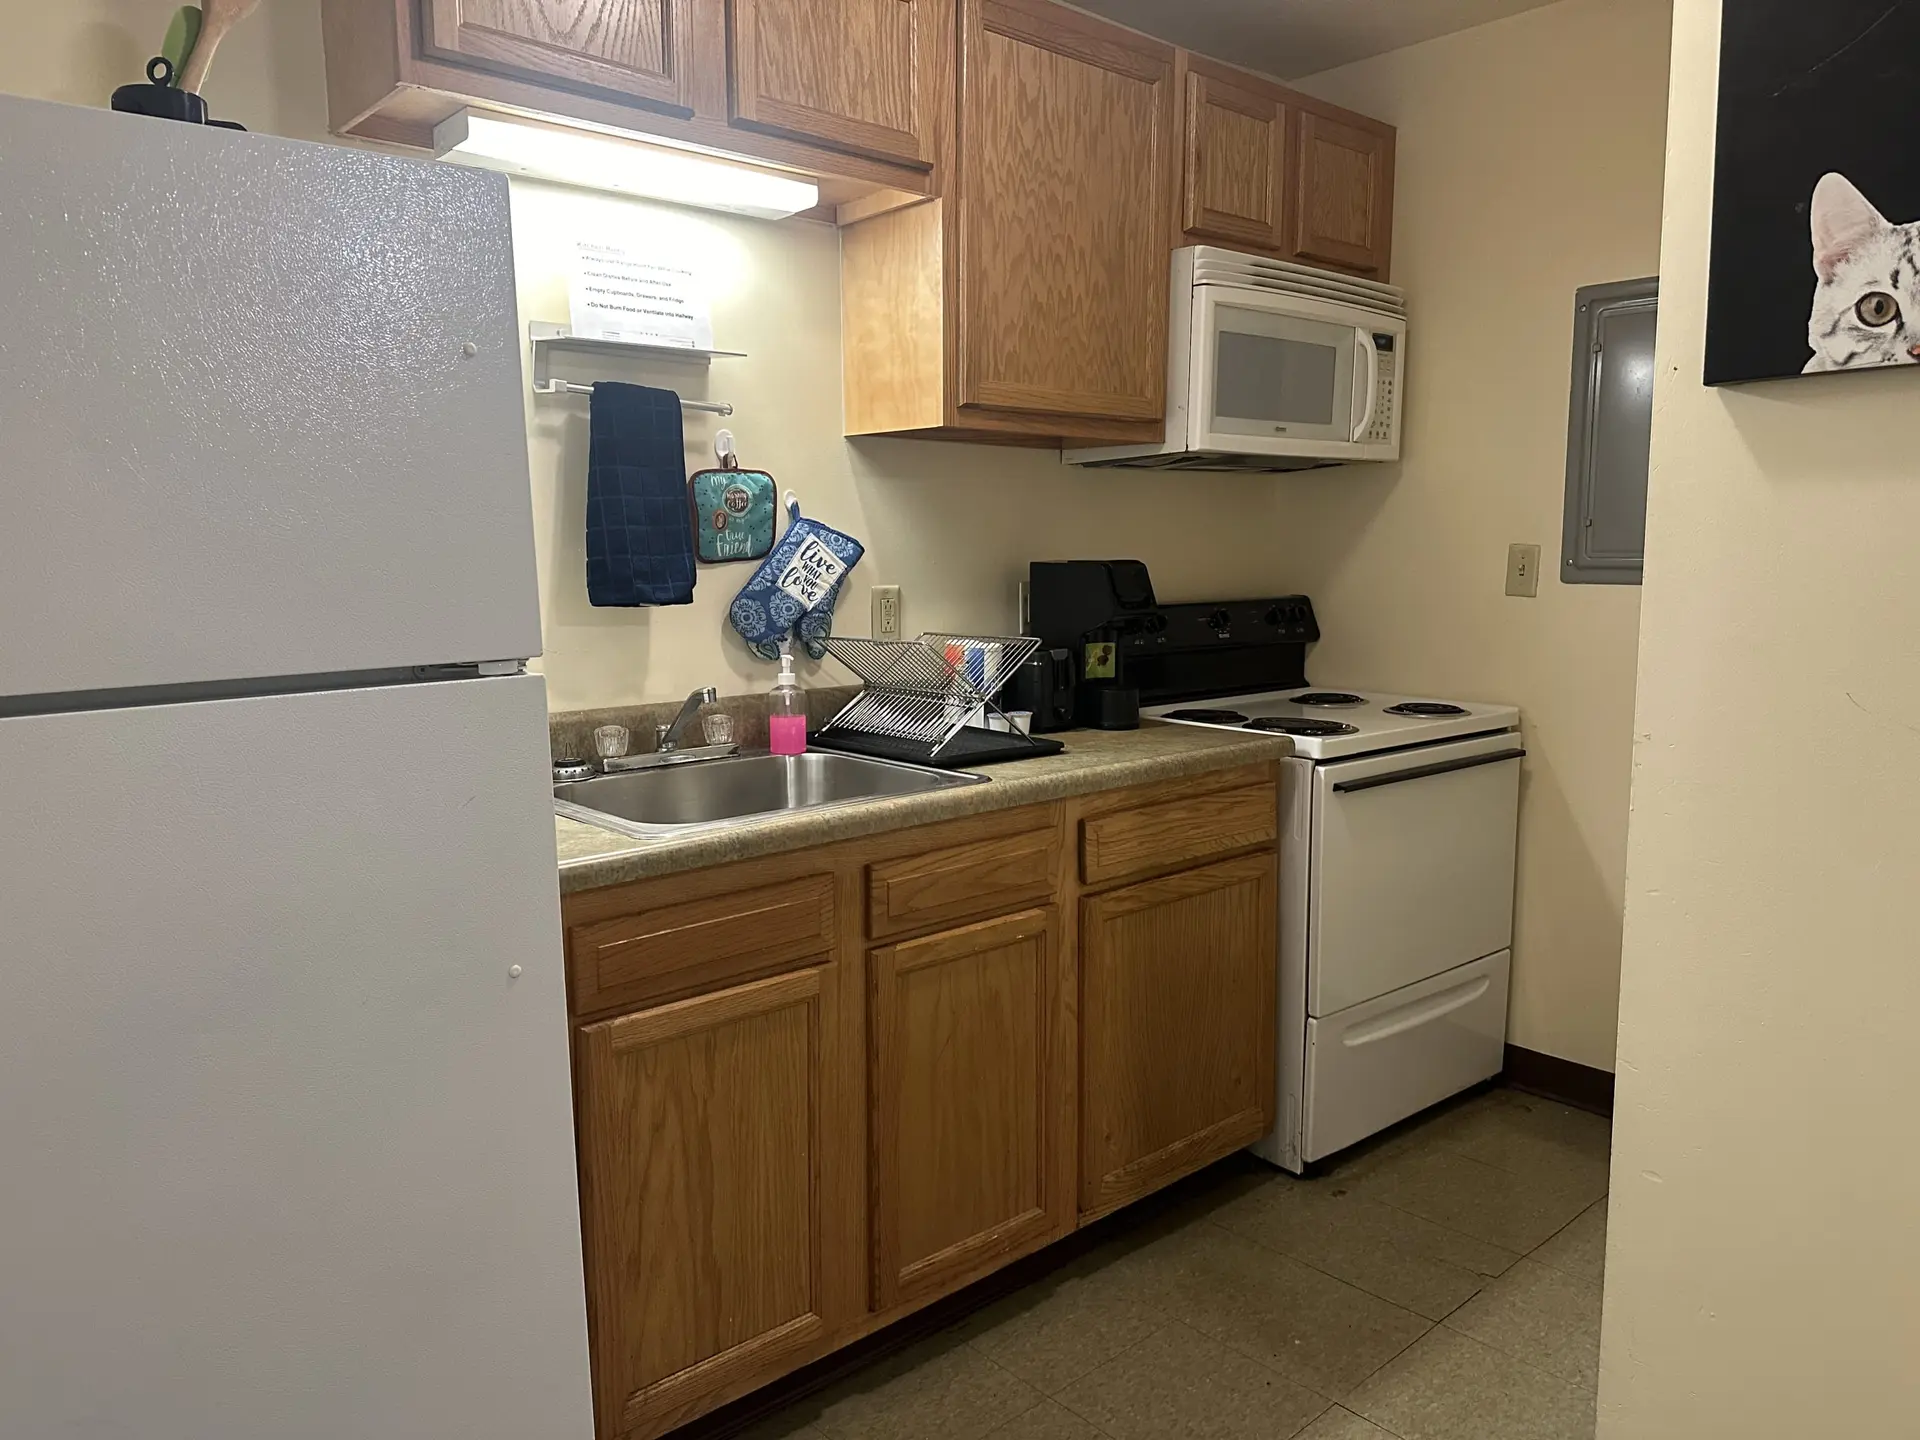 2 Bedroom 2 Bath Apartment | Heart of Downtown PIT